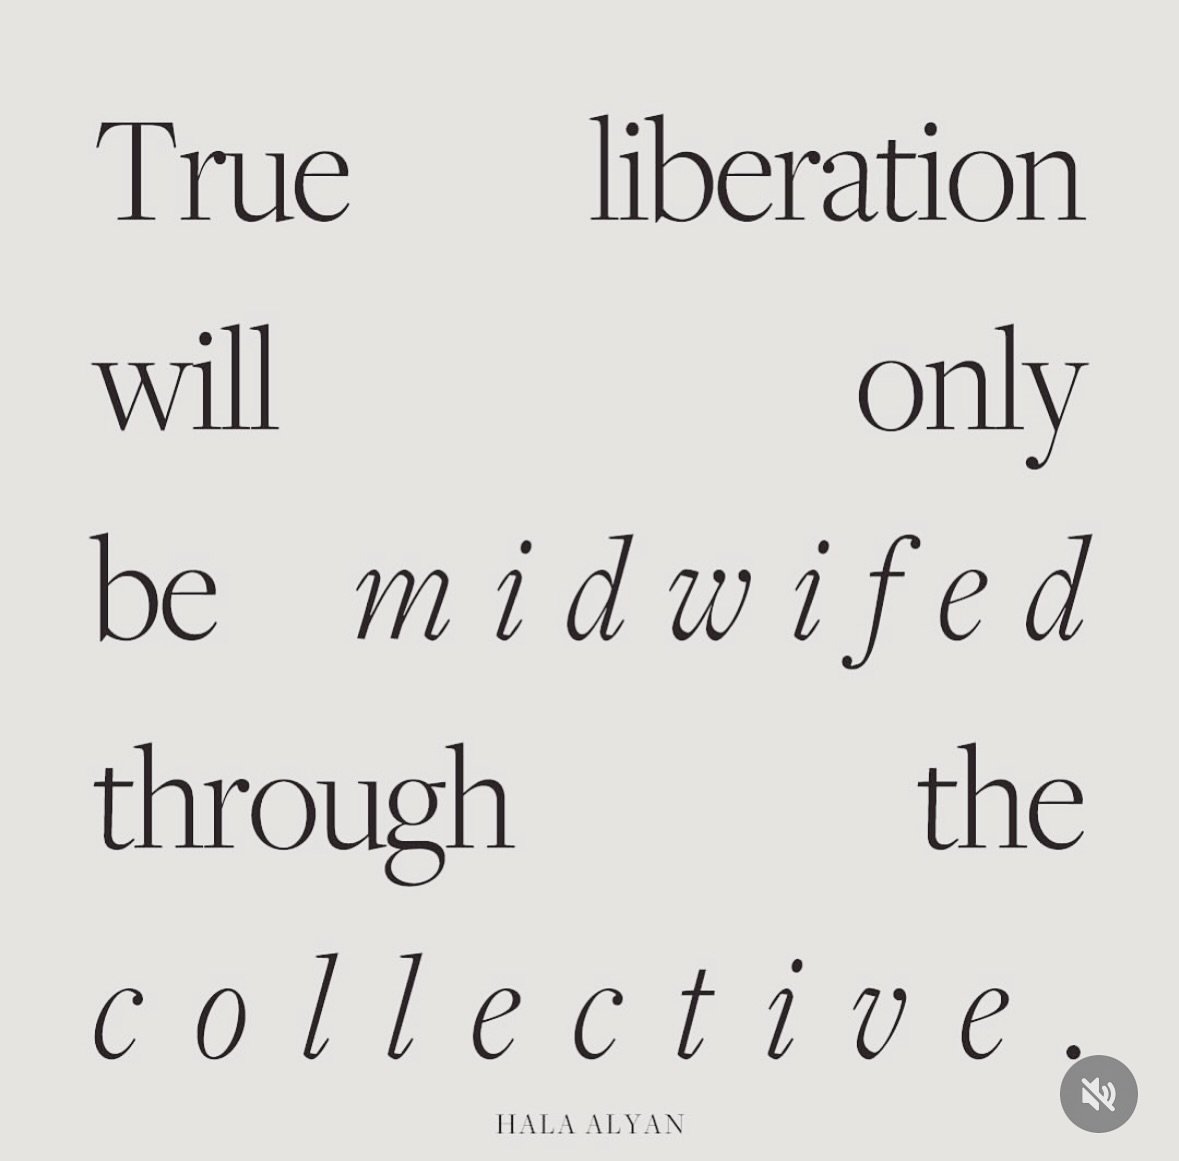 Amplifying Voices: Community &amp; Mutual Aid

&ldquo;True
liberation
will
only
be
midwifed
through
the
collective&rdquo; &mdash; 

HALA ALYAN

This reminder from @hala.n.alyan may be more important than ever #collectivethoughts #collectiveconsciousn